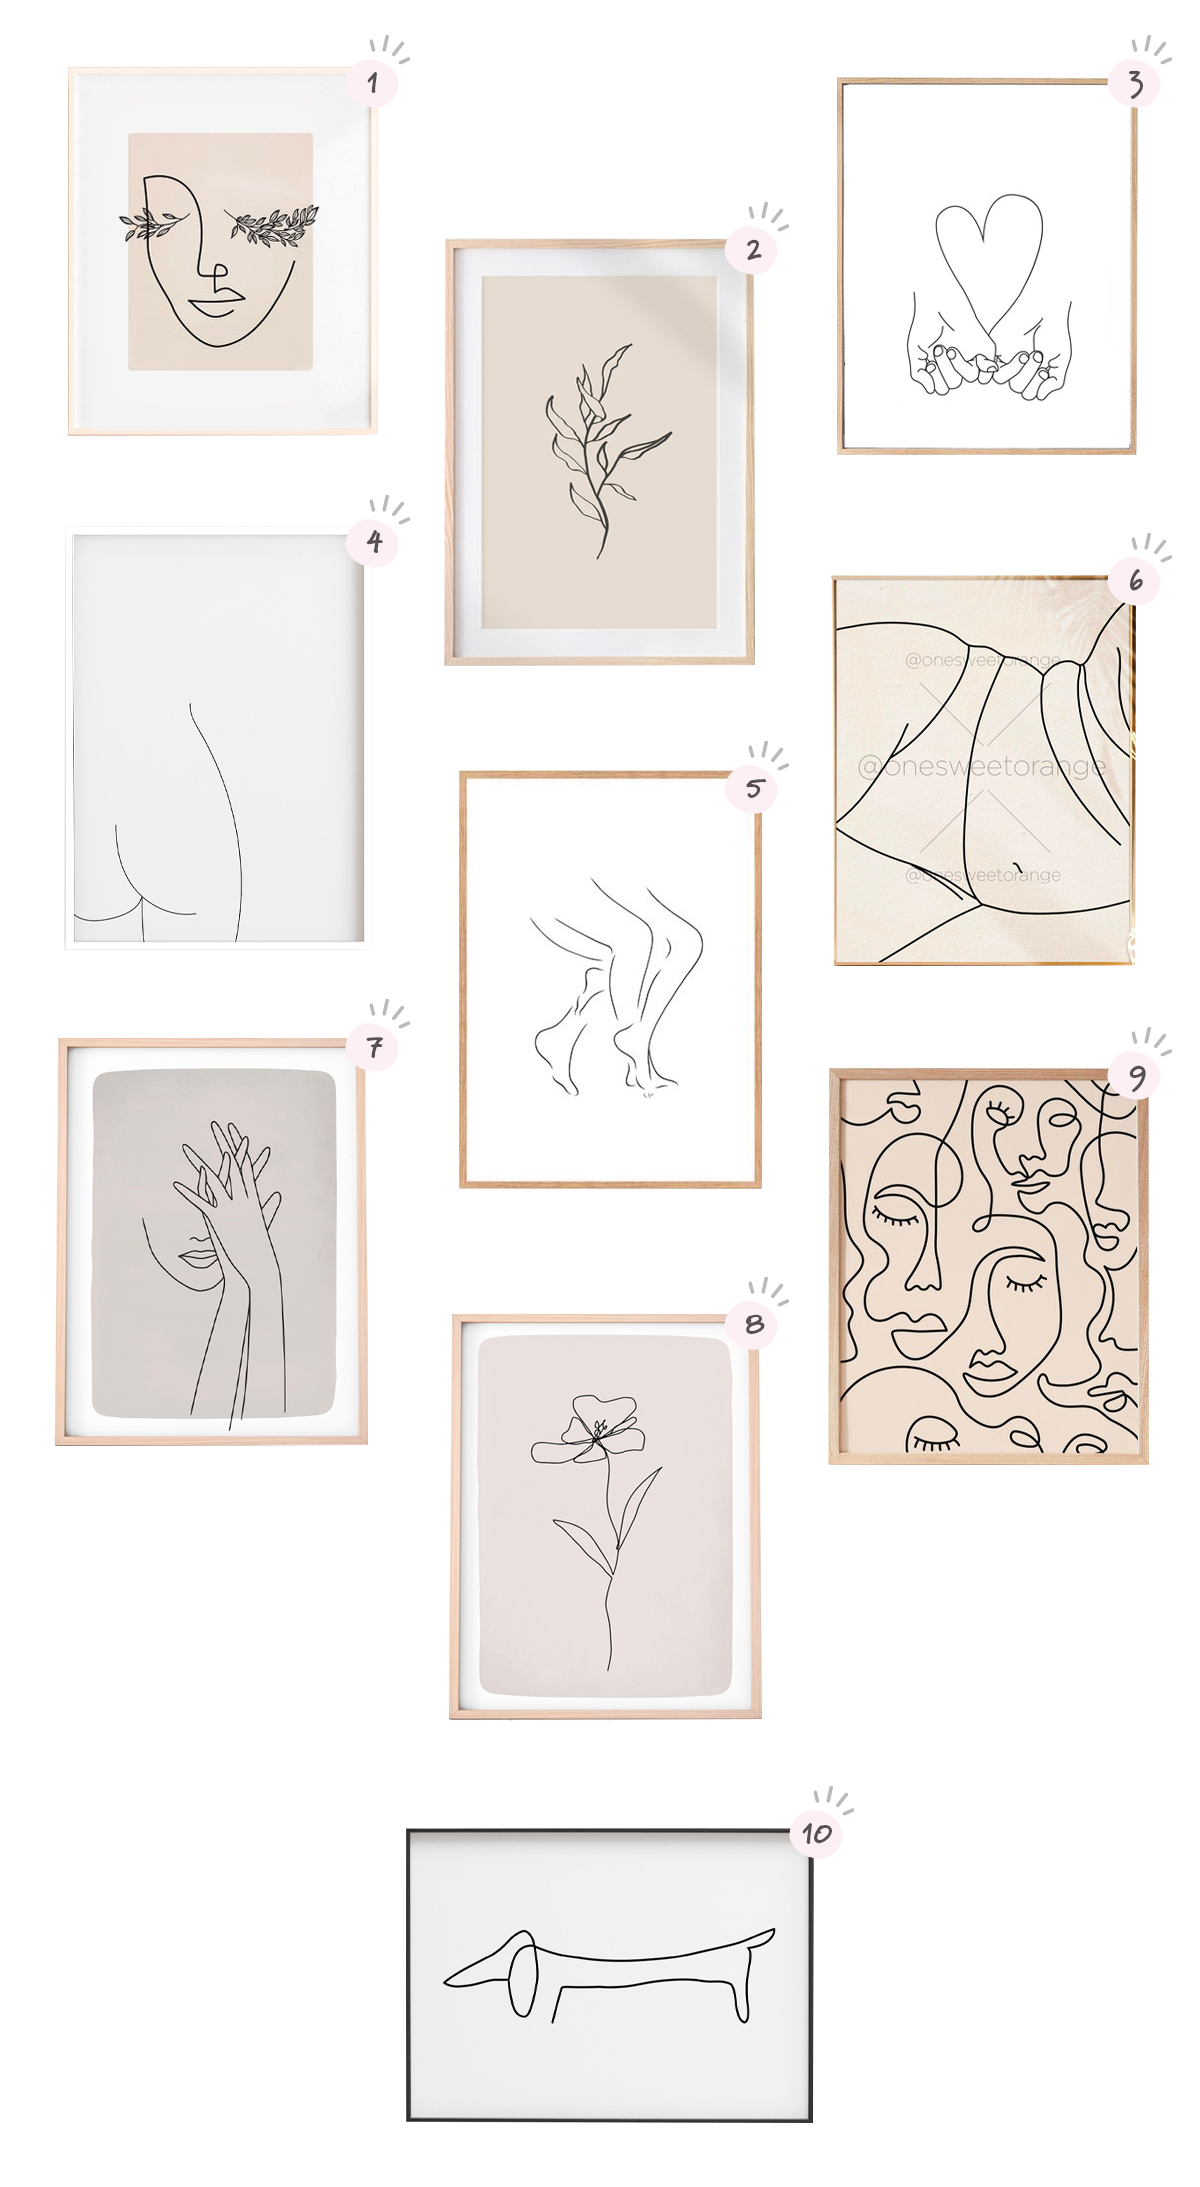 10 framed line art pieces from etsy on a while background